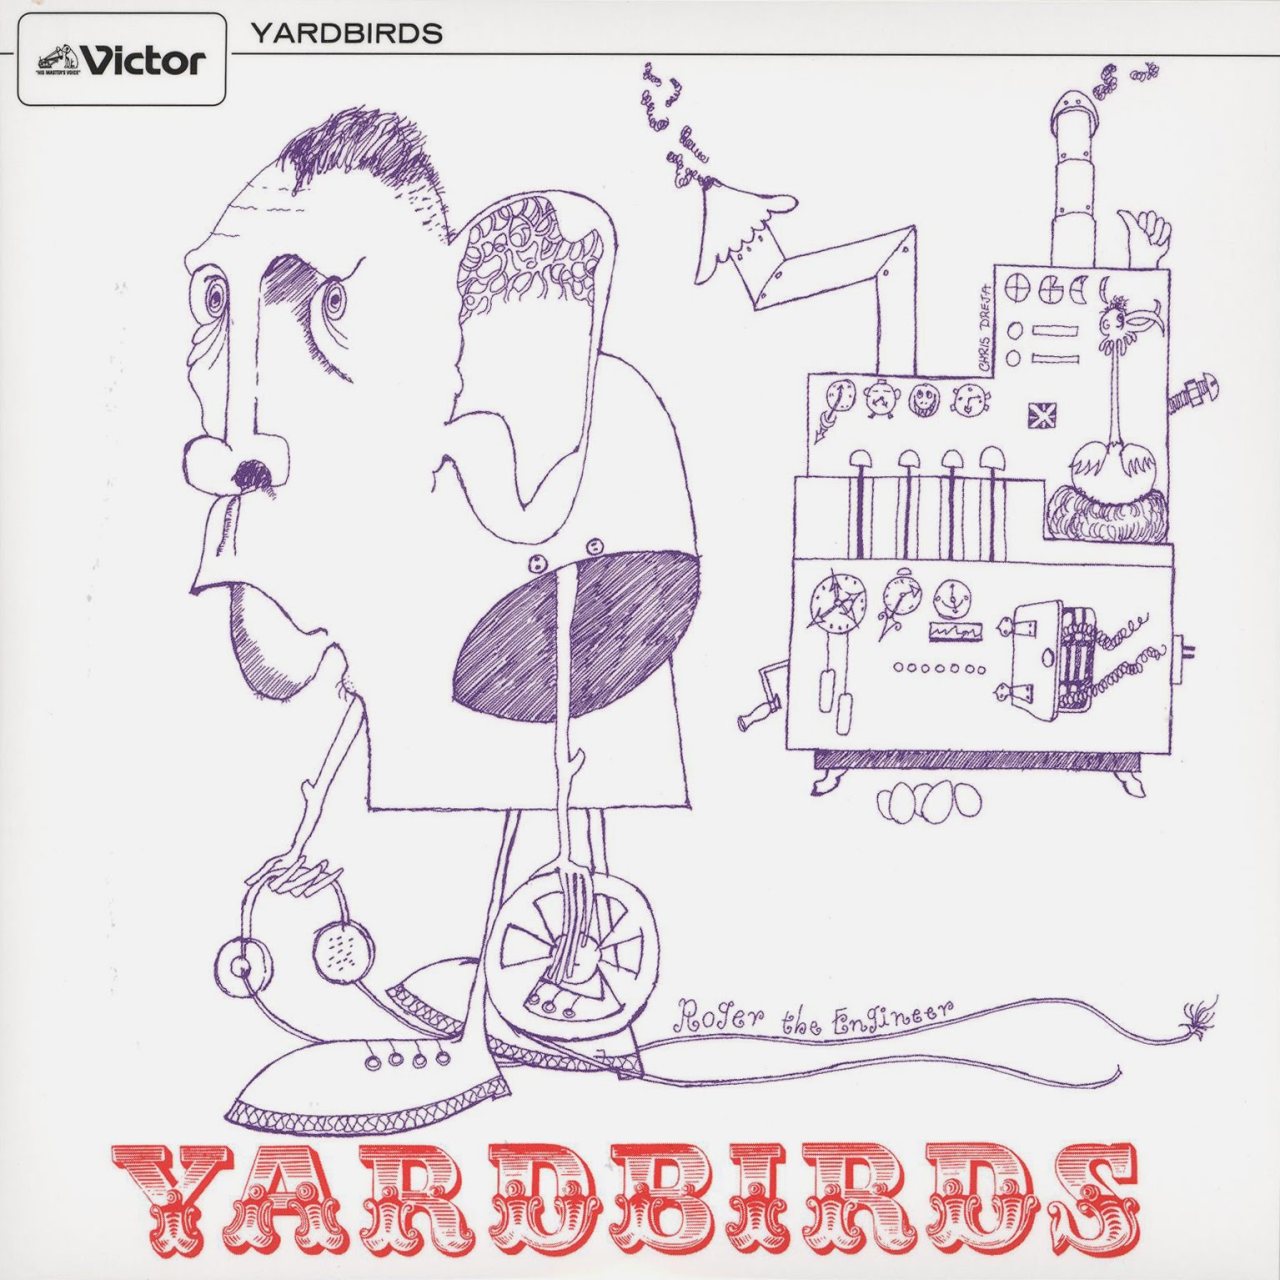 9:36 AM EDT May 22, 2022:  The Yardbirds - Ever Since The World Began 
From the album Roger the Engineer
(July 15, 1966)     Last song scrobbled from iTunes at Last.fmFile under: Proto-Zeppelin-- #The Yardbirds #Roger the Engineer  #Ever Since The World Began